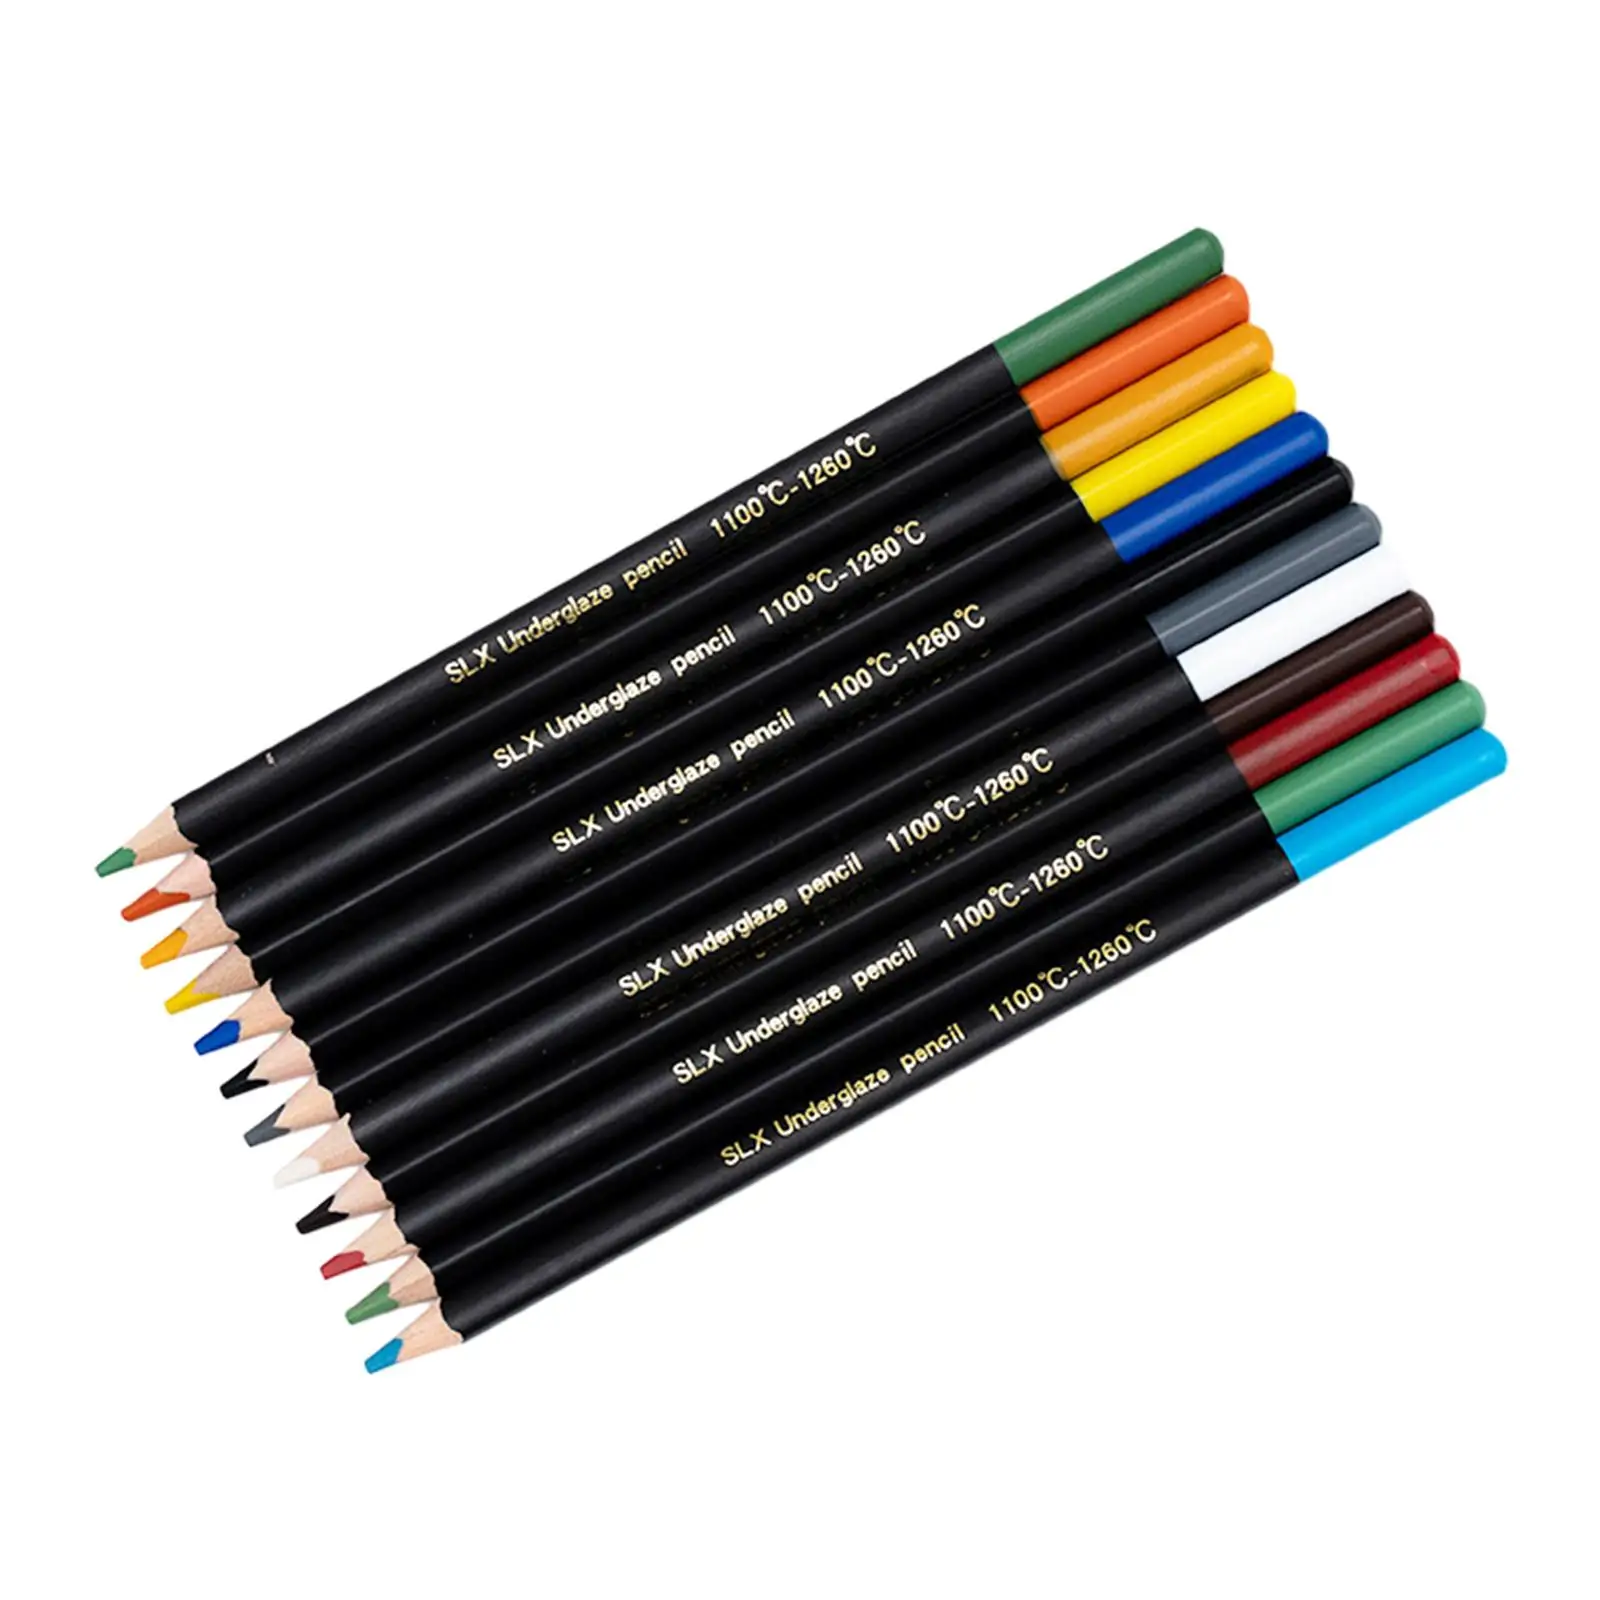 Colored Pencils Professional 12 Colored Coloring Pencils for Hand Painting Sketching Art Craft Supplies Coloring Books Beginners